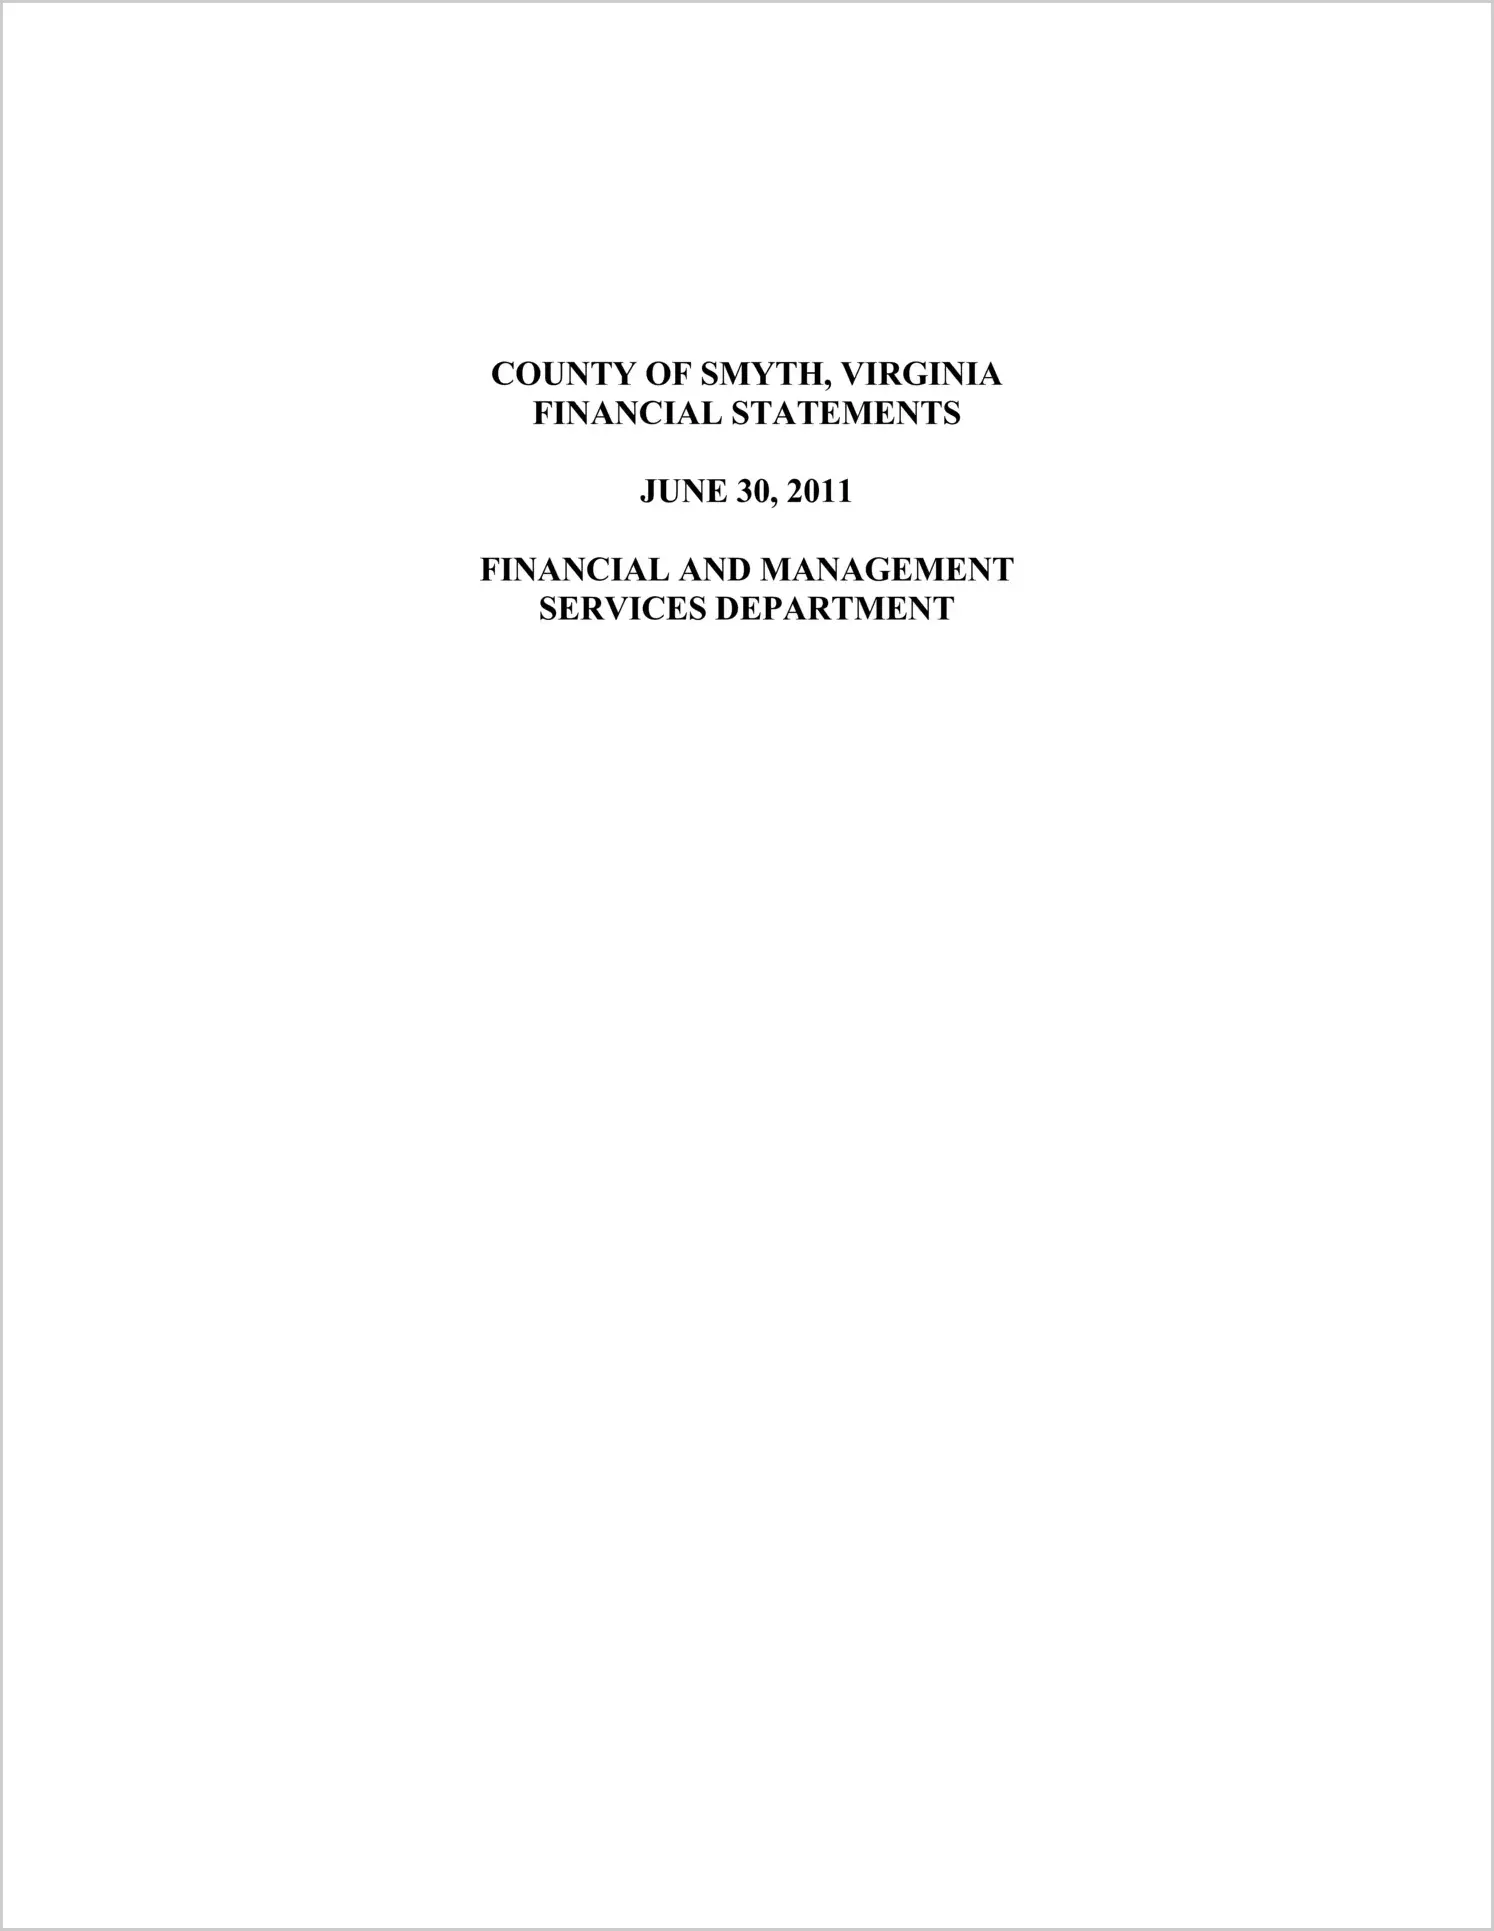 2011 Annual Financial Report for County of Smyth